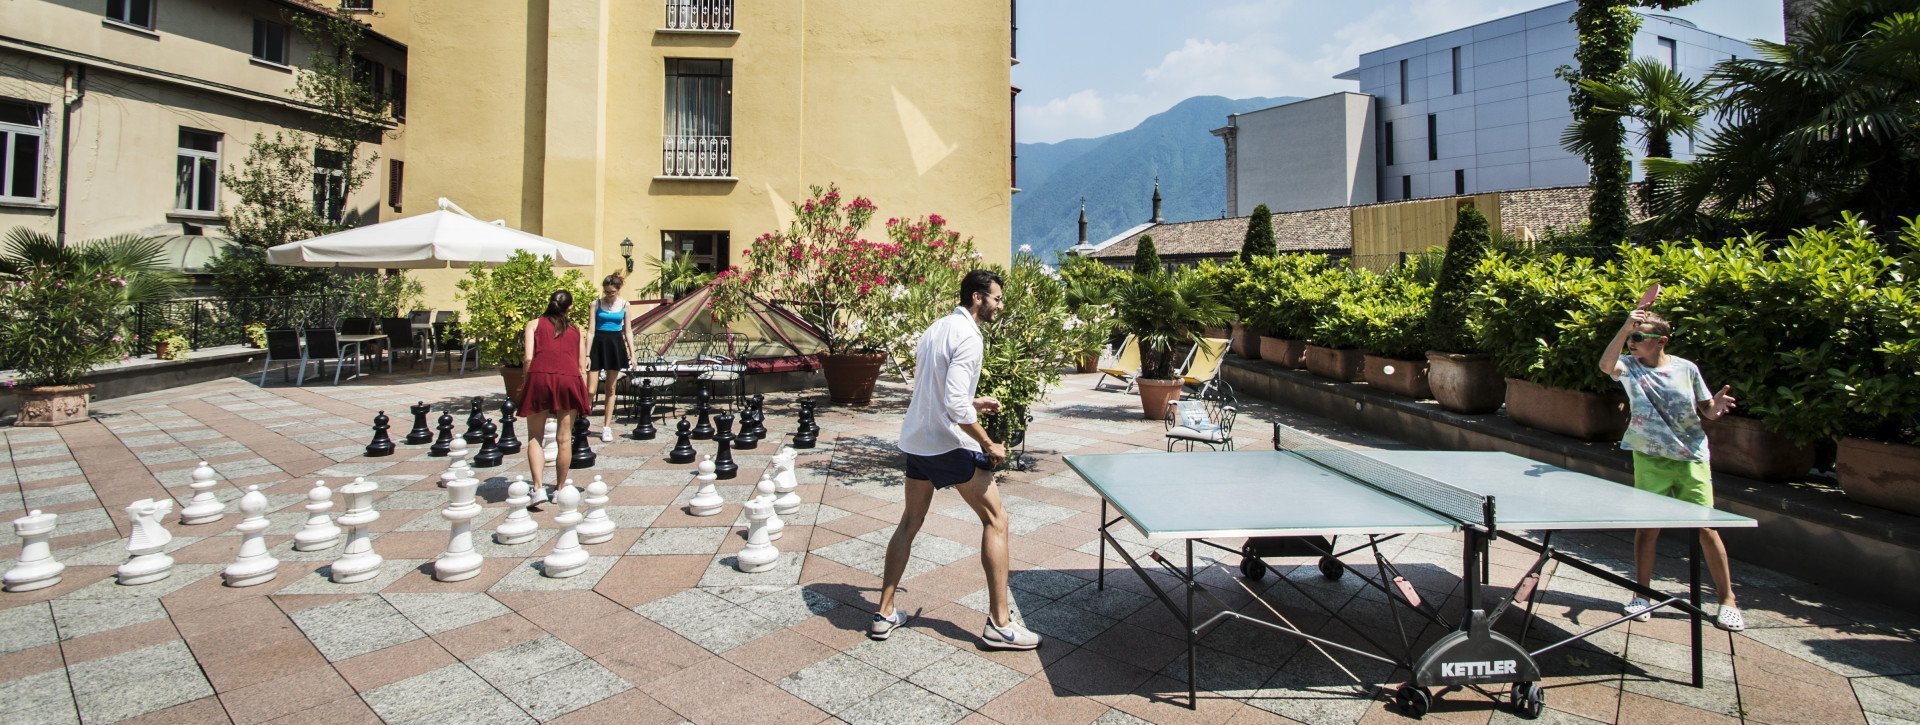 Terrace with ping pong and street chess